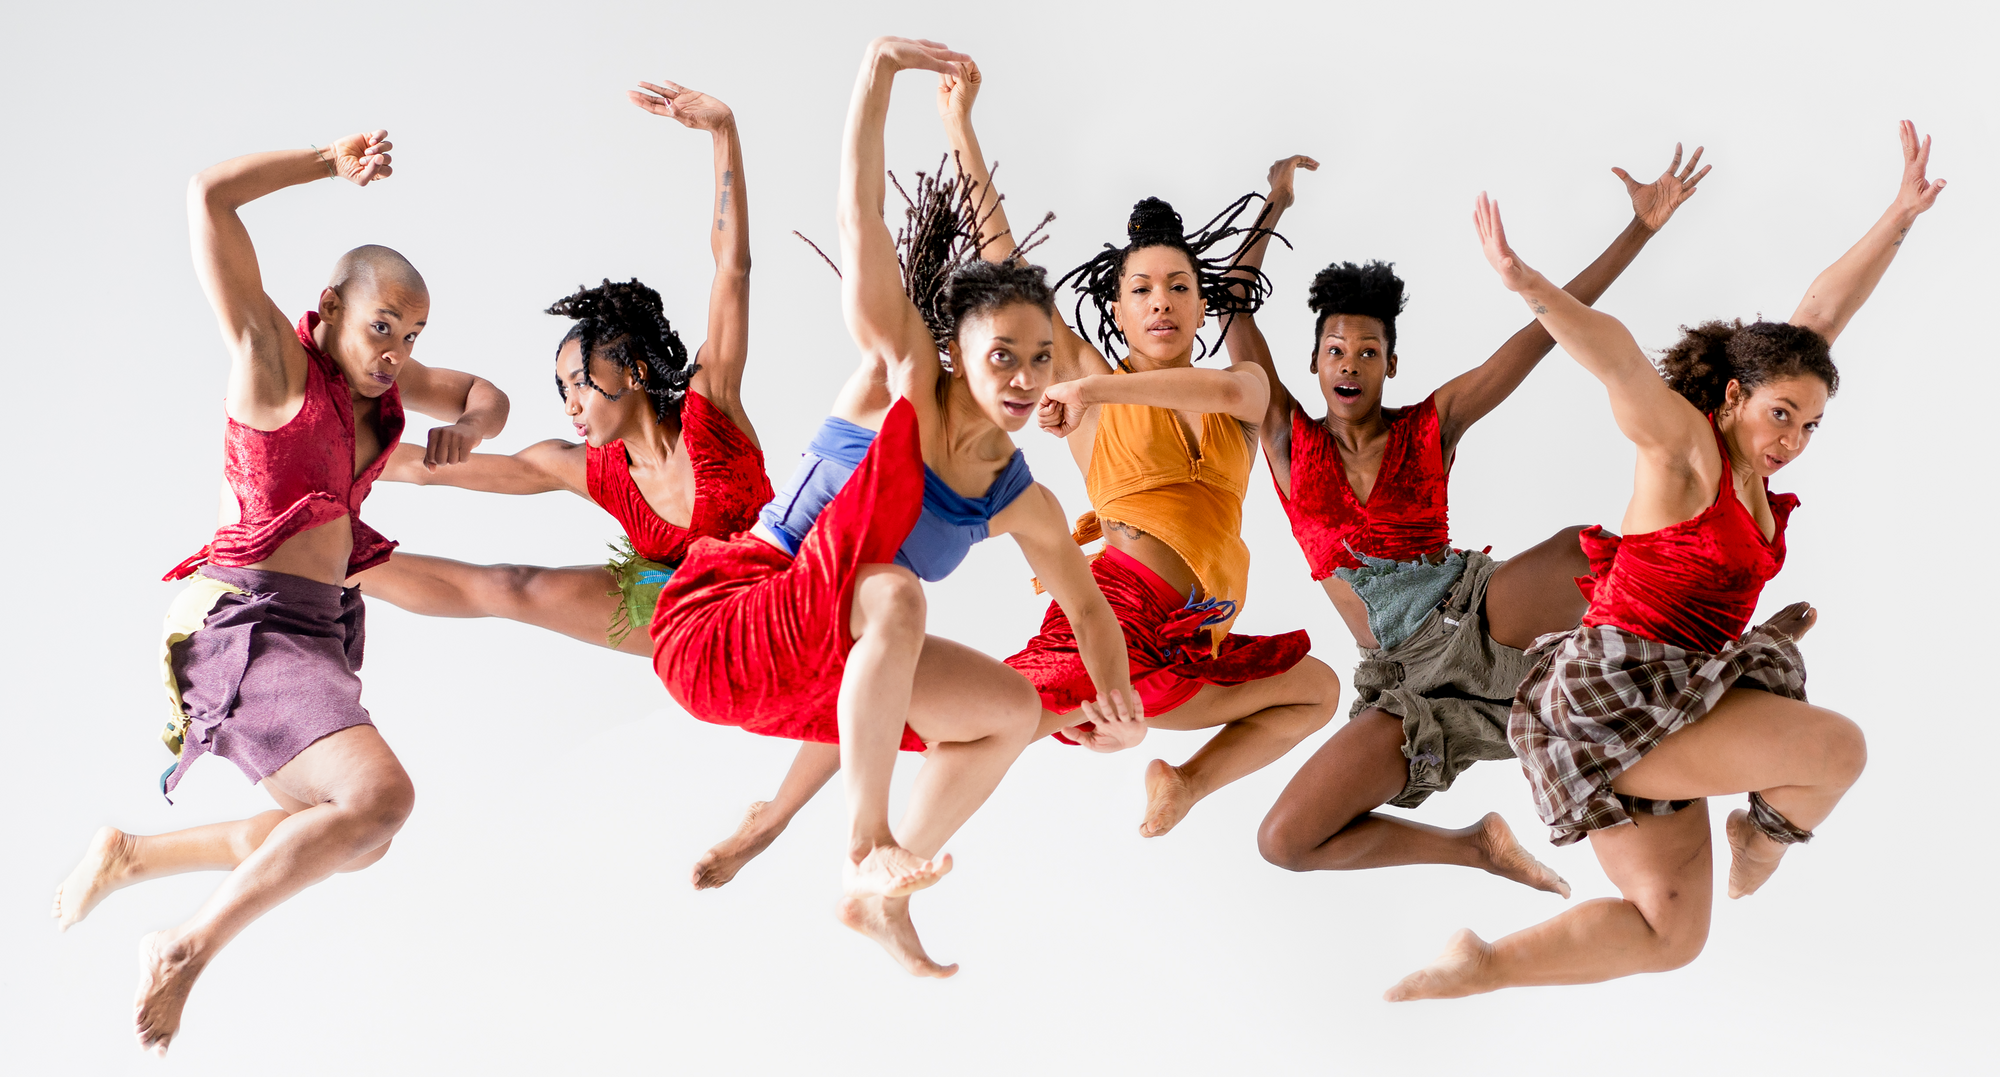 Six dancers dressed in red jumping in the air together.